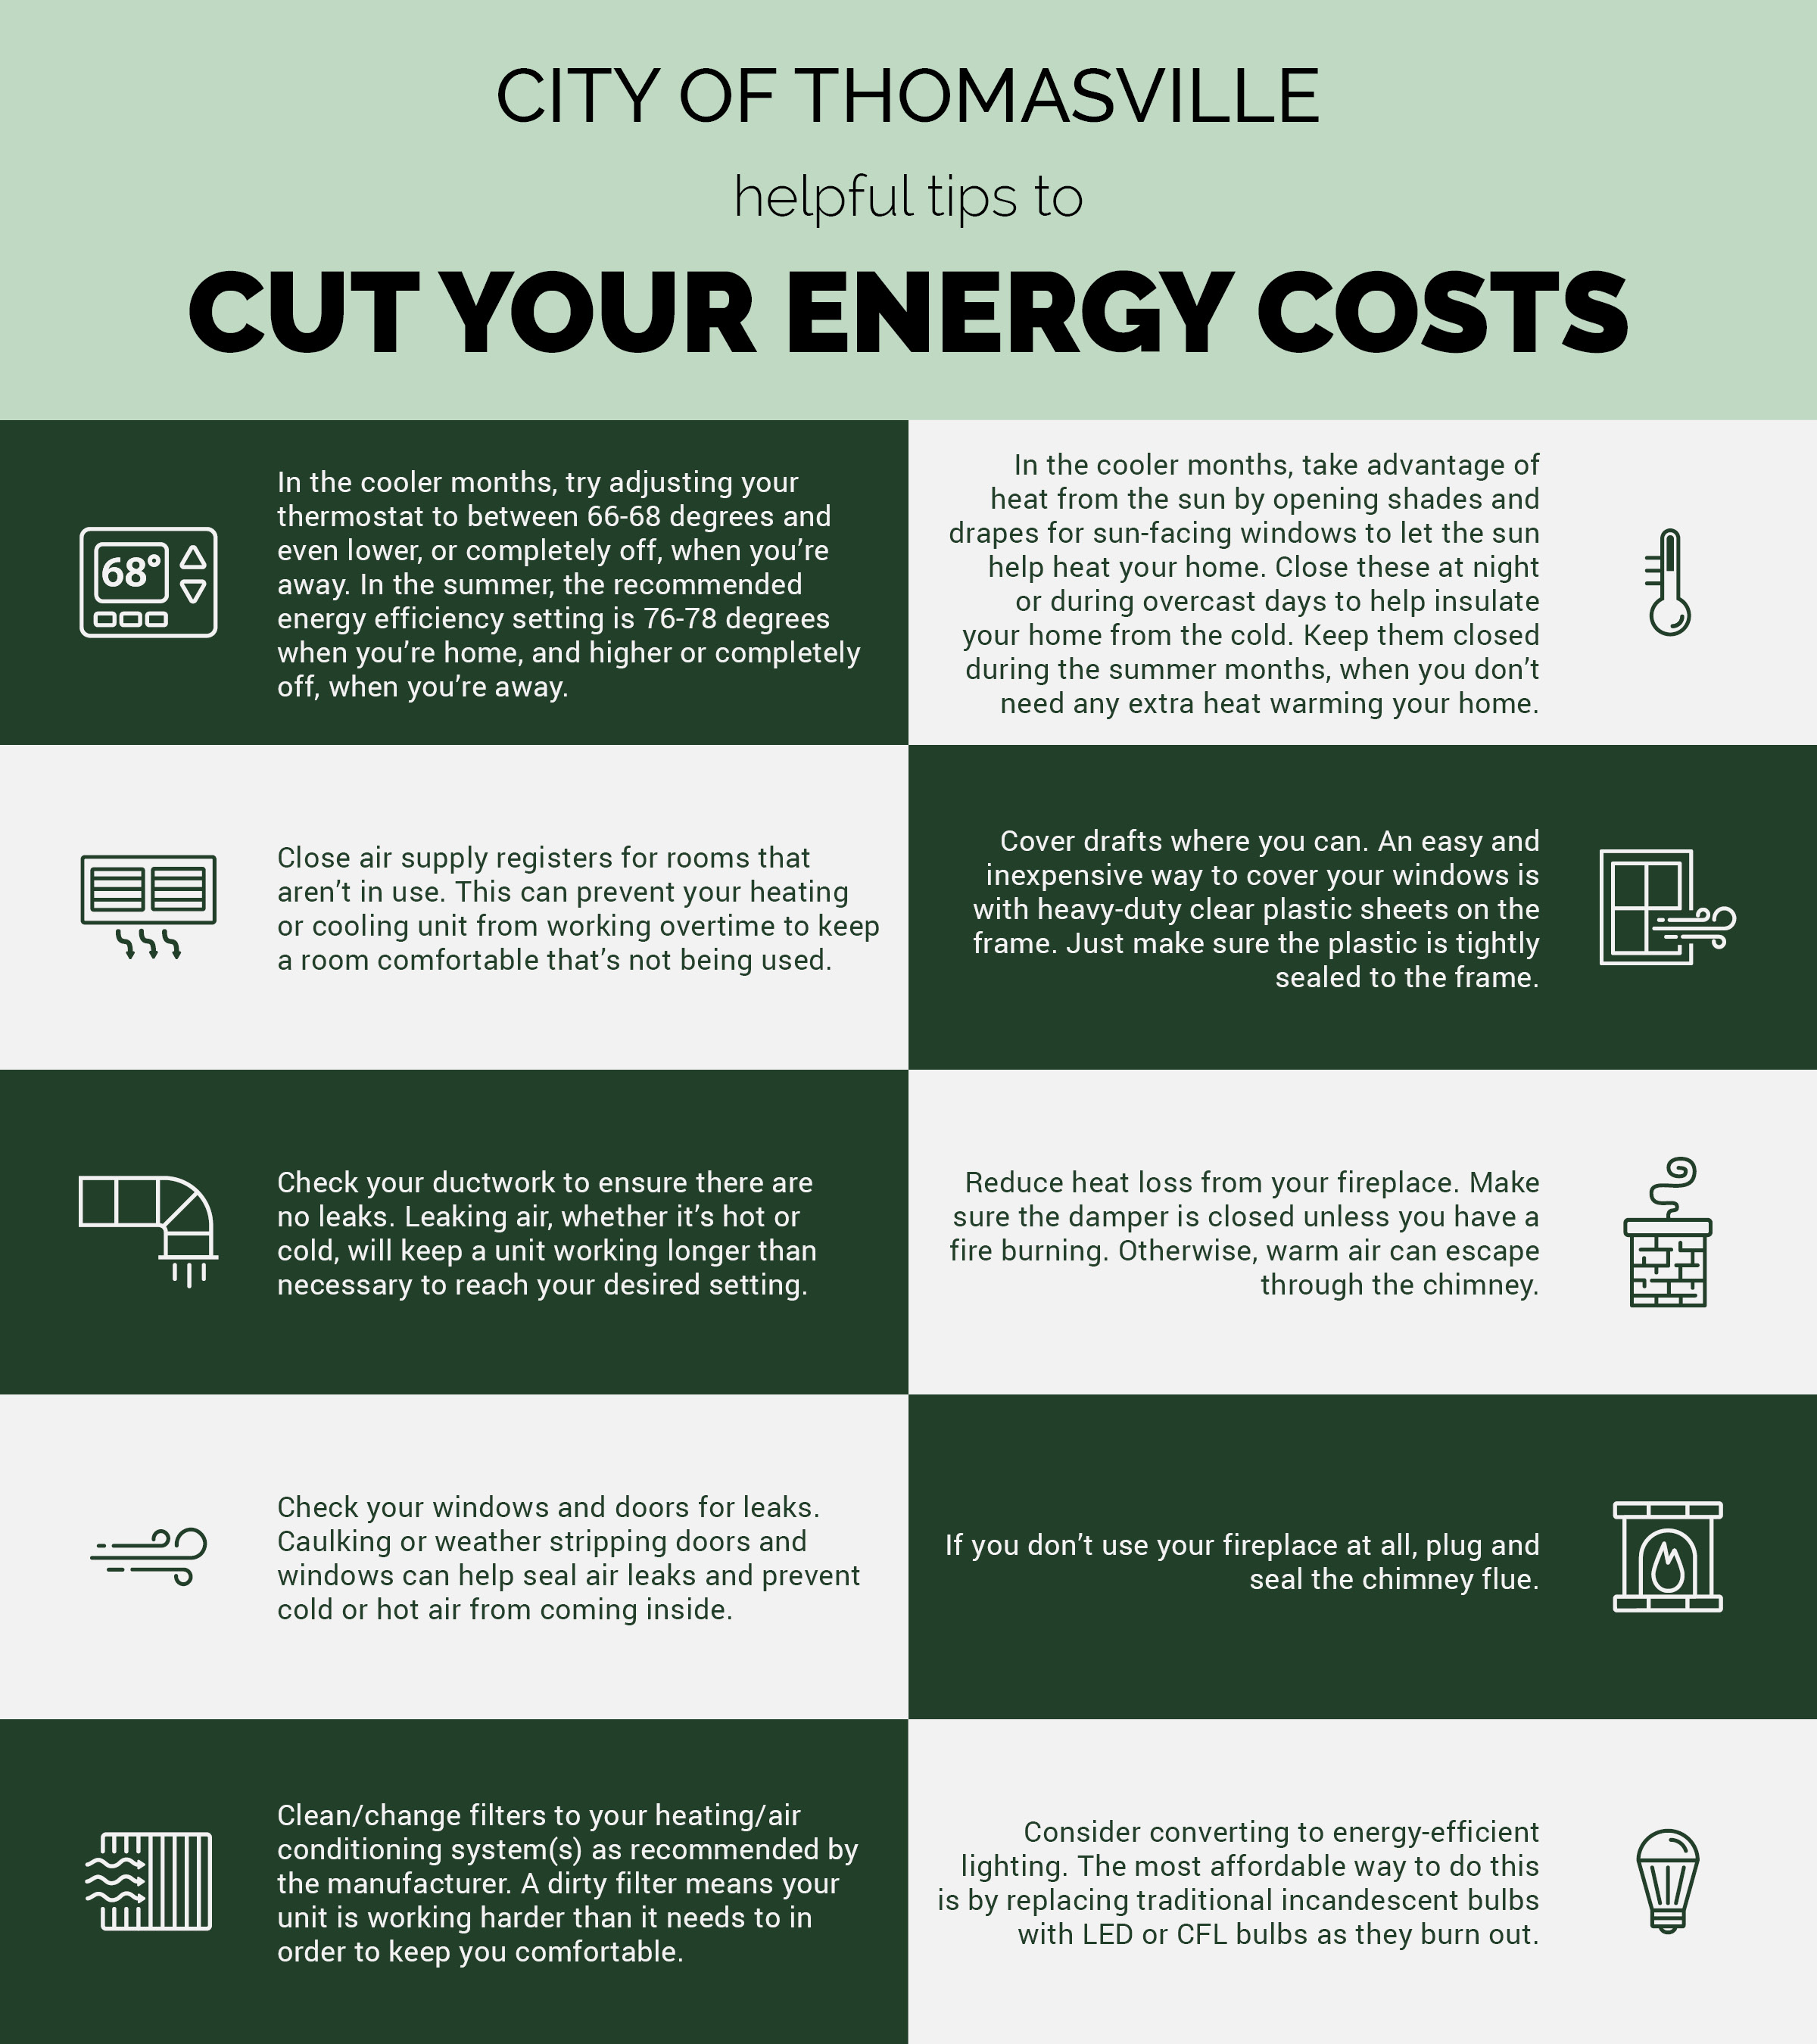 Helpful tips to cut your energy cost